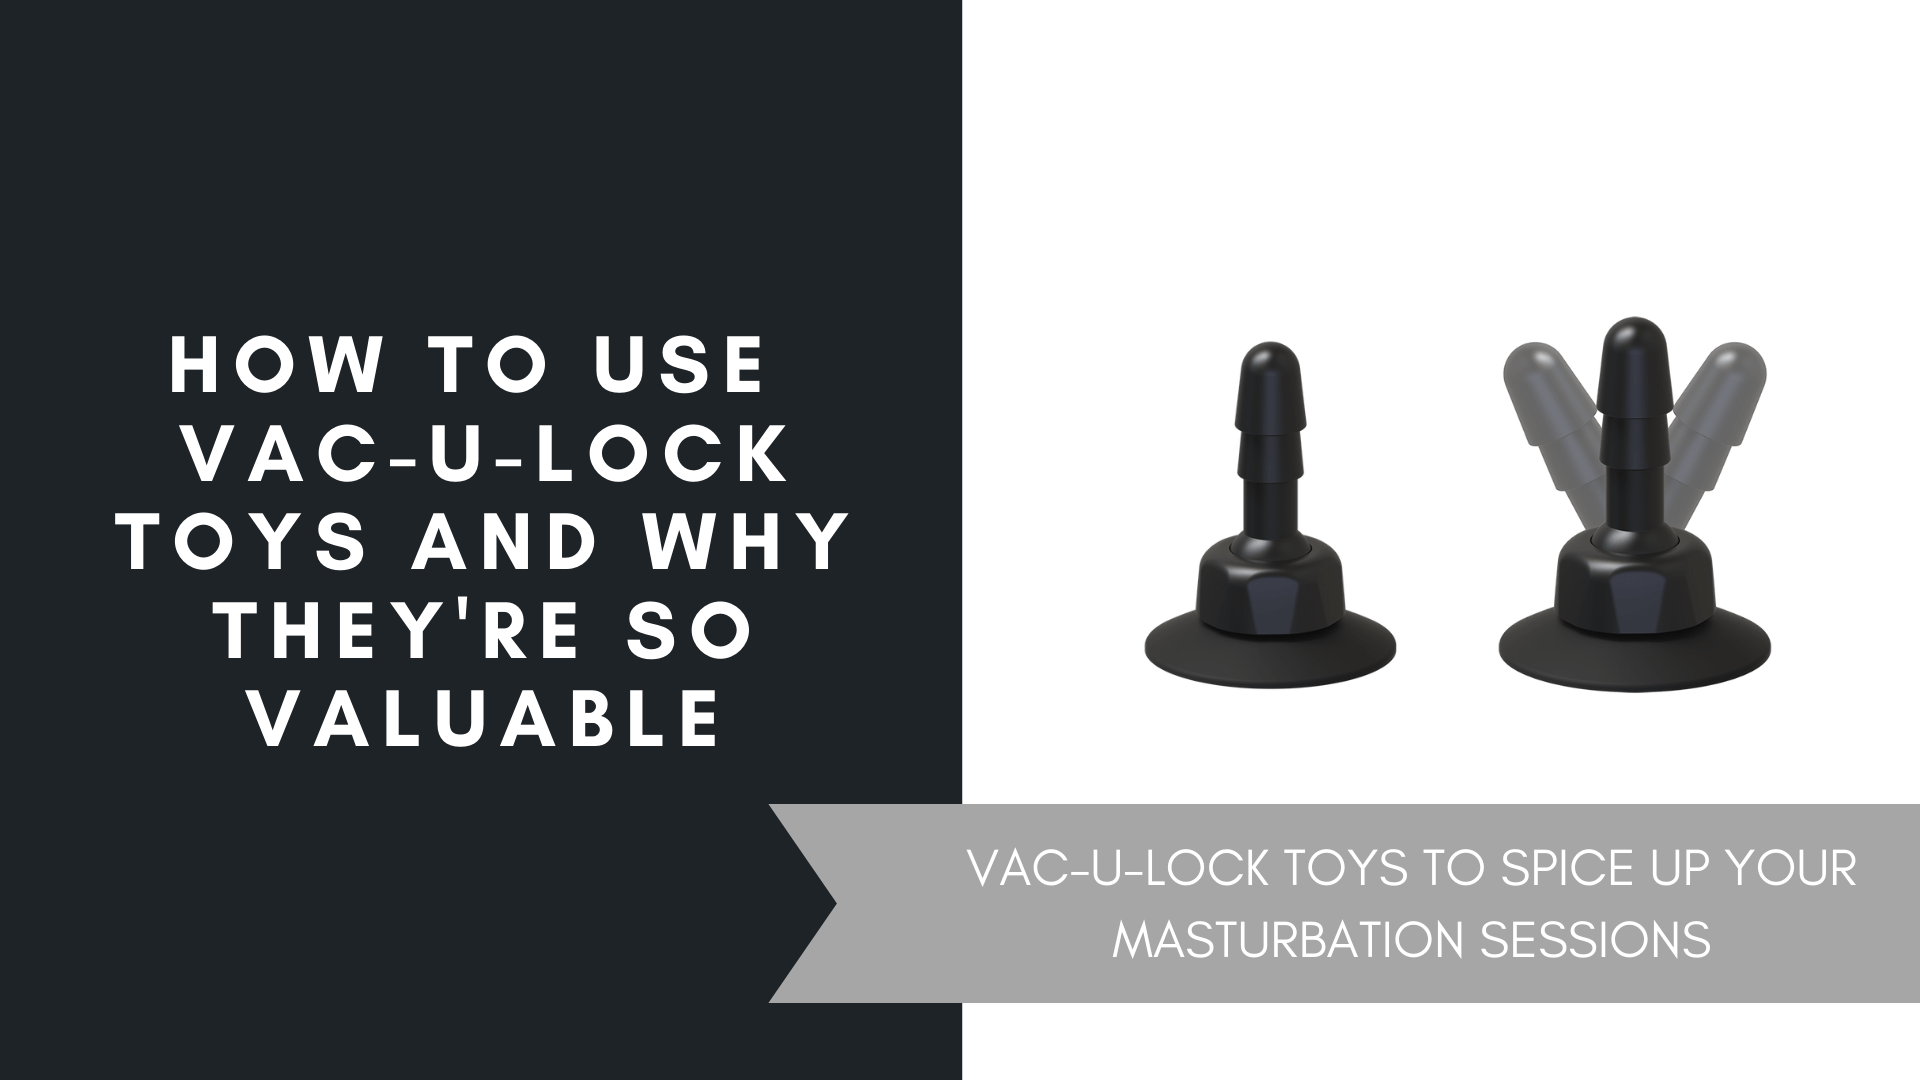 How To Use Vac-U-Lock Toys And Why They’re So Valuable, June 2021